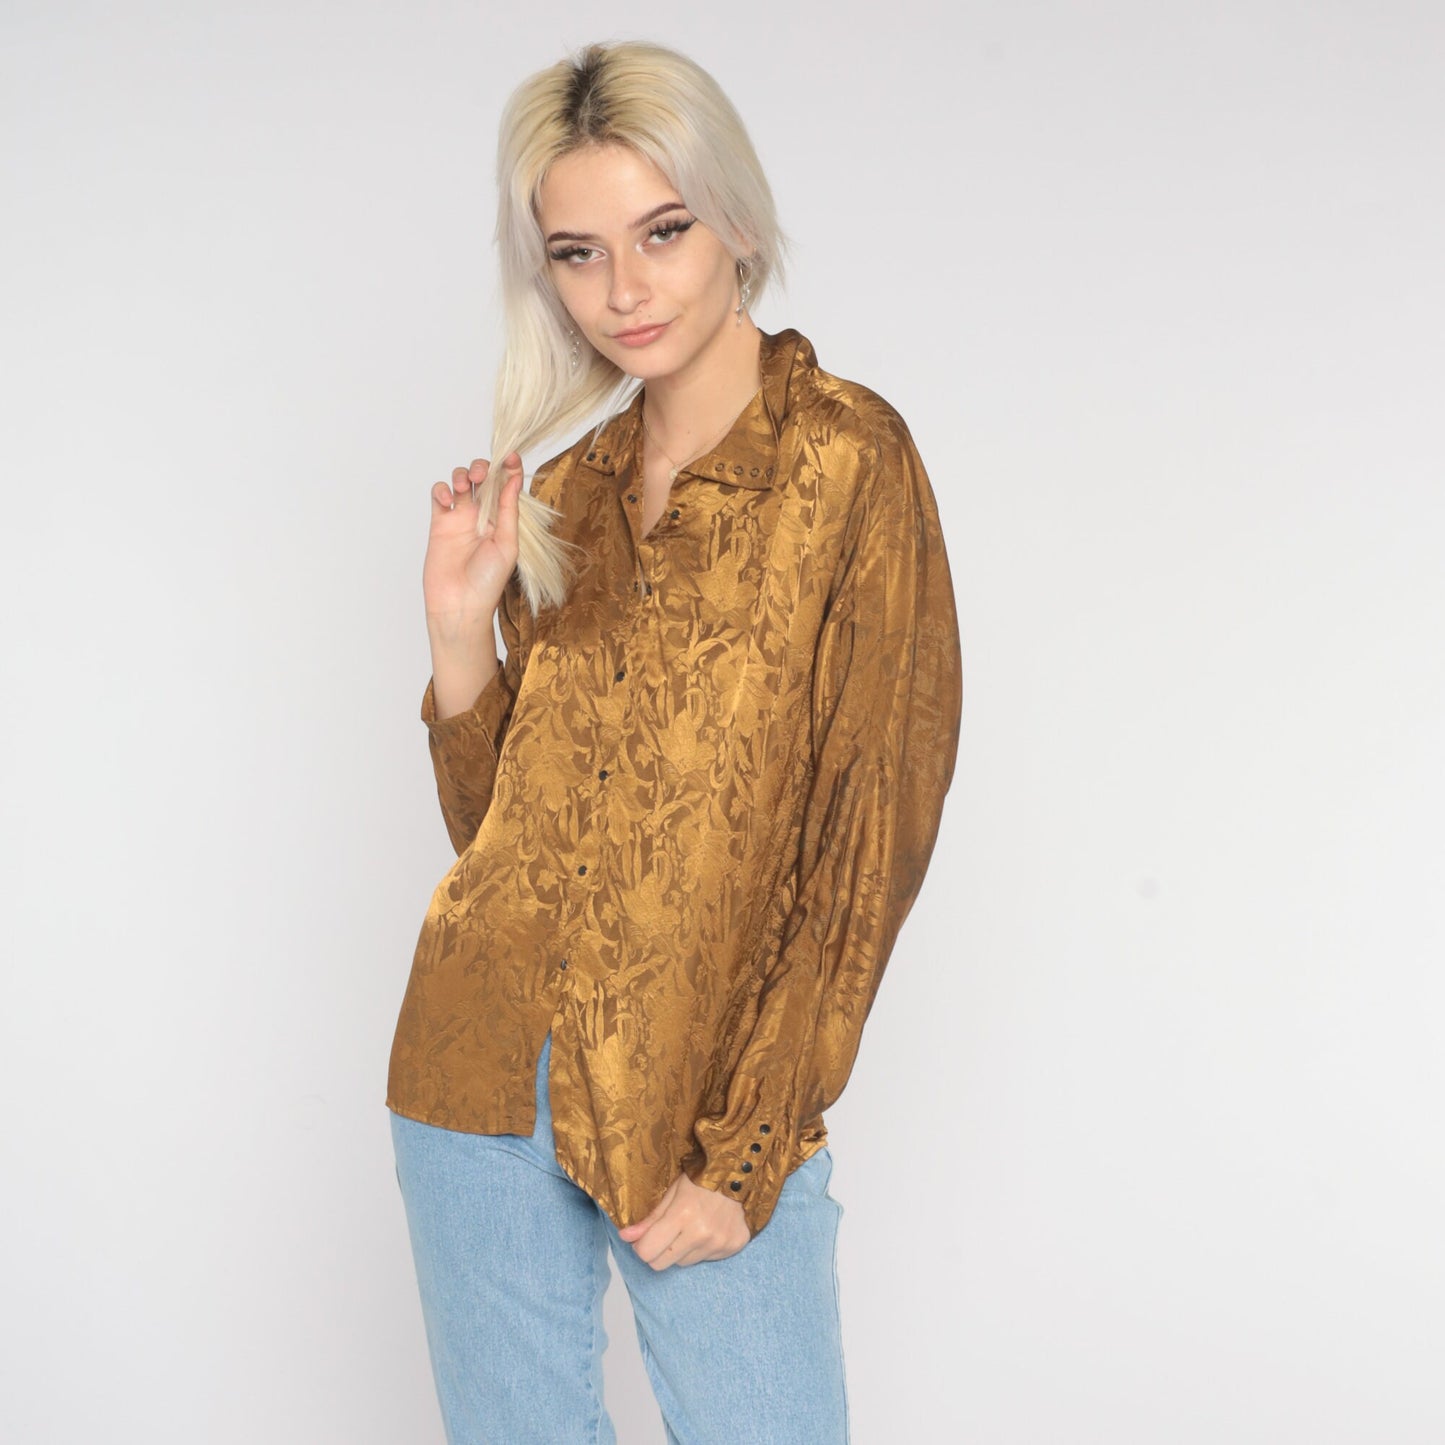 Brown Floral Shirt Embossed 80s Long Sleeve Blouse Floral Shirt Button Up 1980s Boho Vintage Statement Top Medium 8